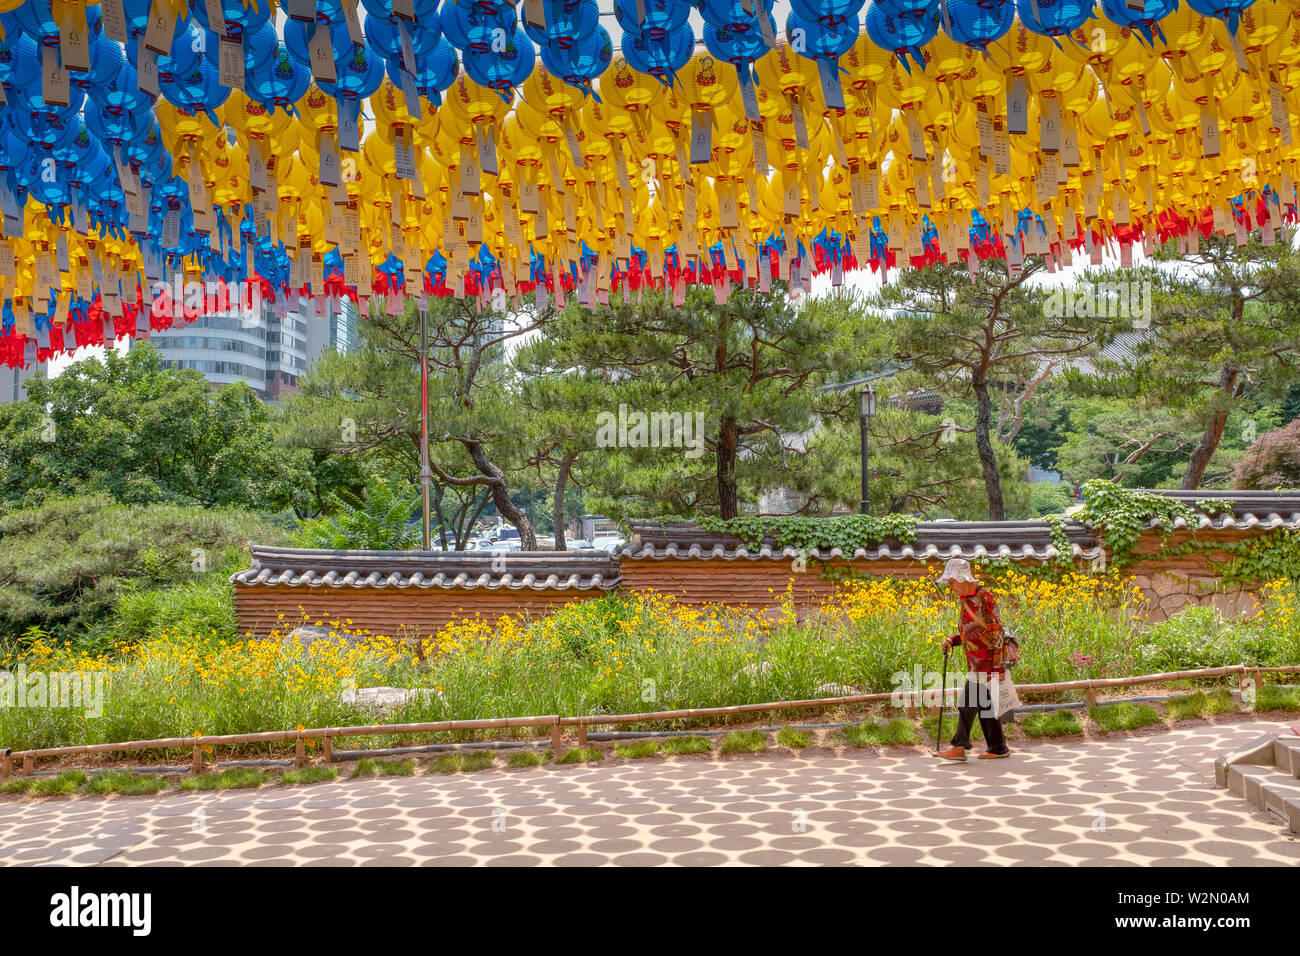 An elderly visitor, colorful lanterns and picturesque pine trees during day time at the Bongeunsa buddhist temple, Seoul, South Korea Stock Photo